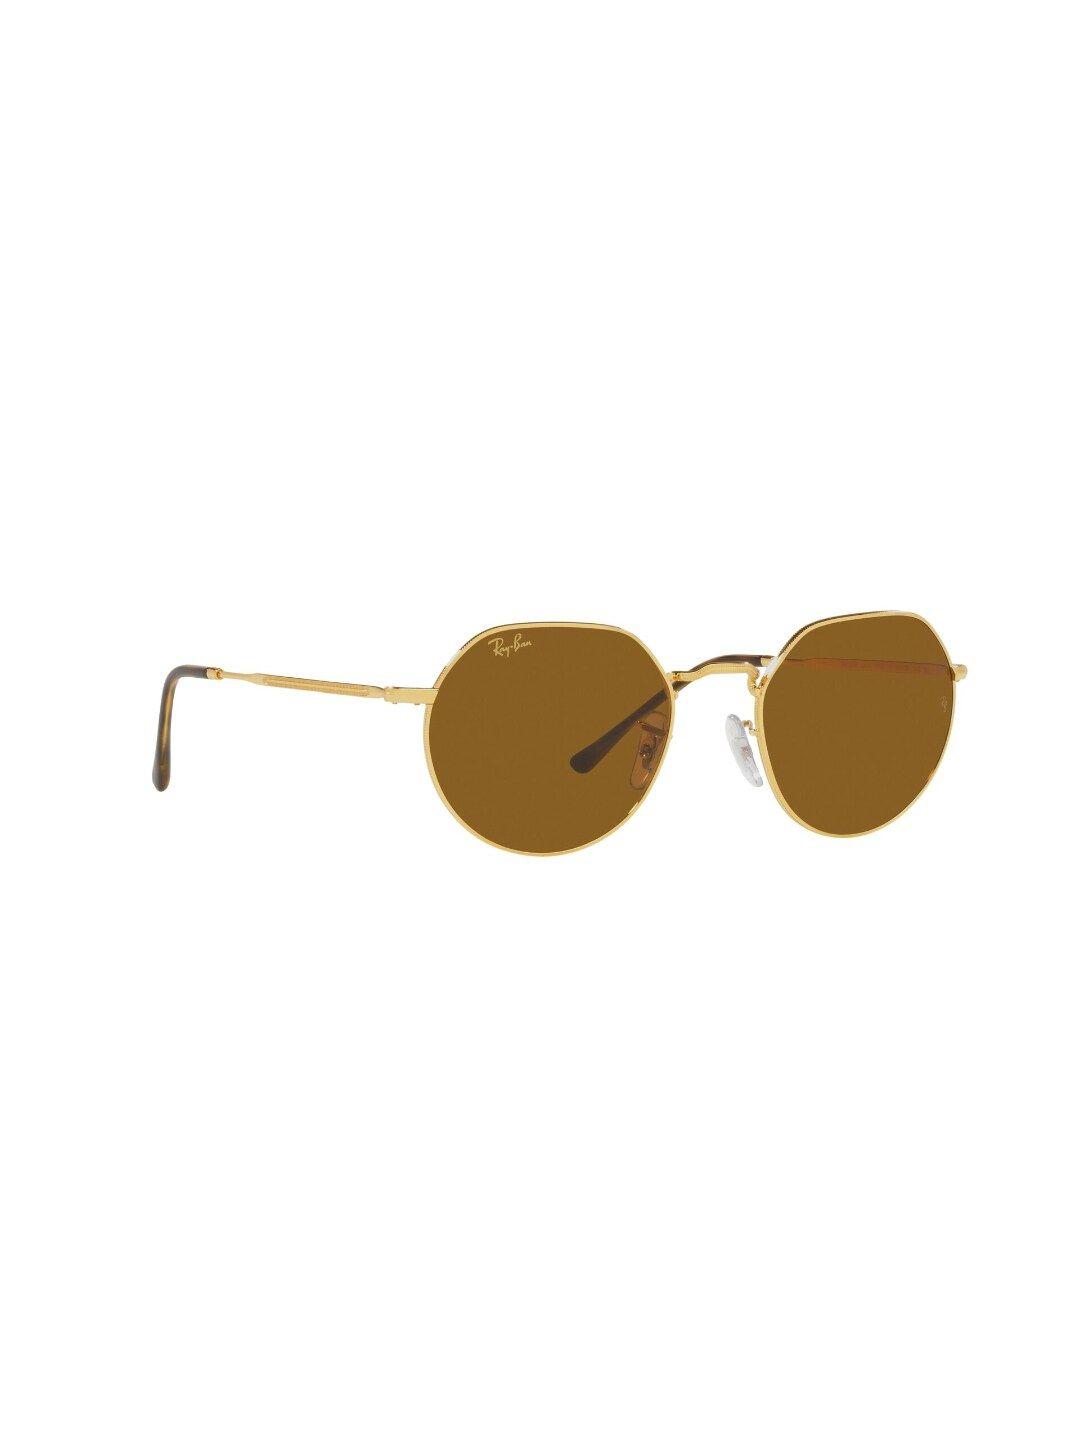 ray-ban unisex brown lens & golden other sunglasses with uv protected lens 8056597584944